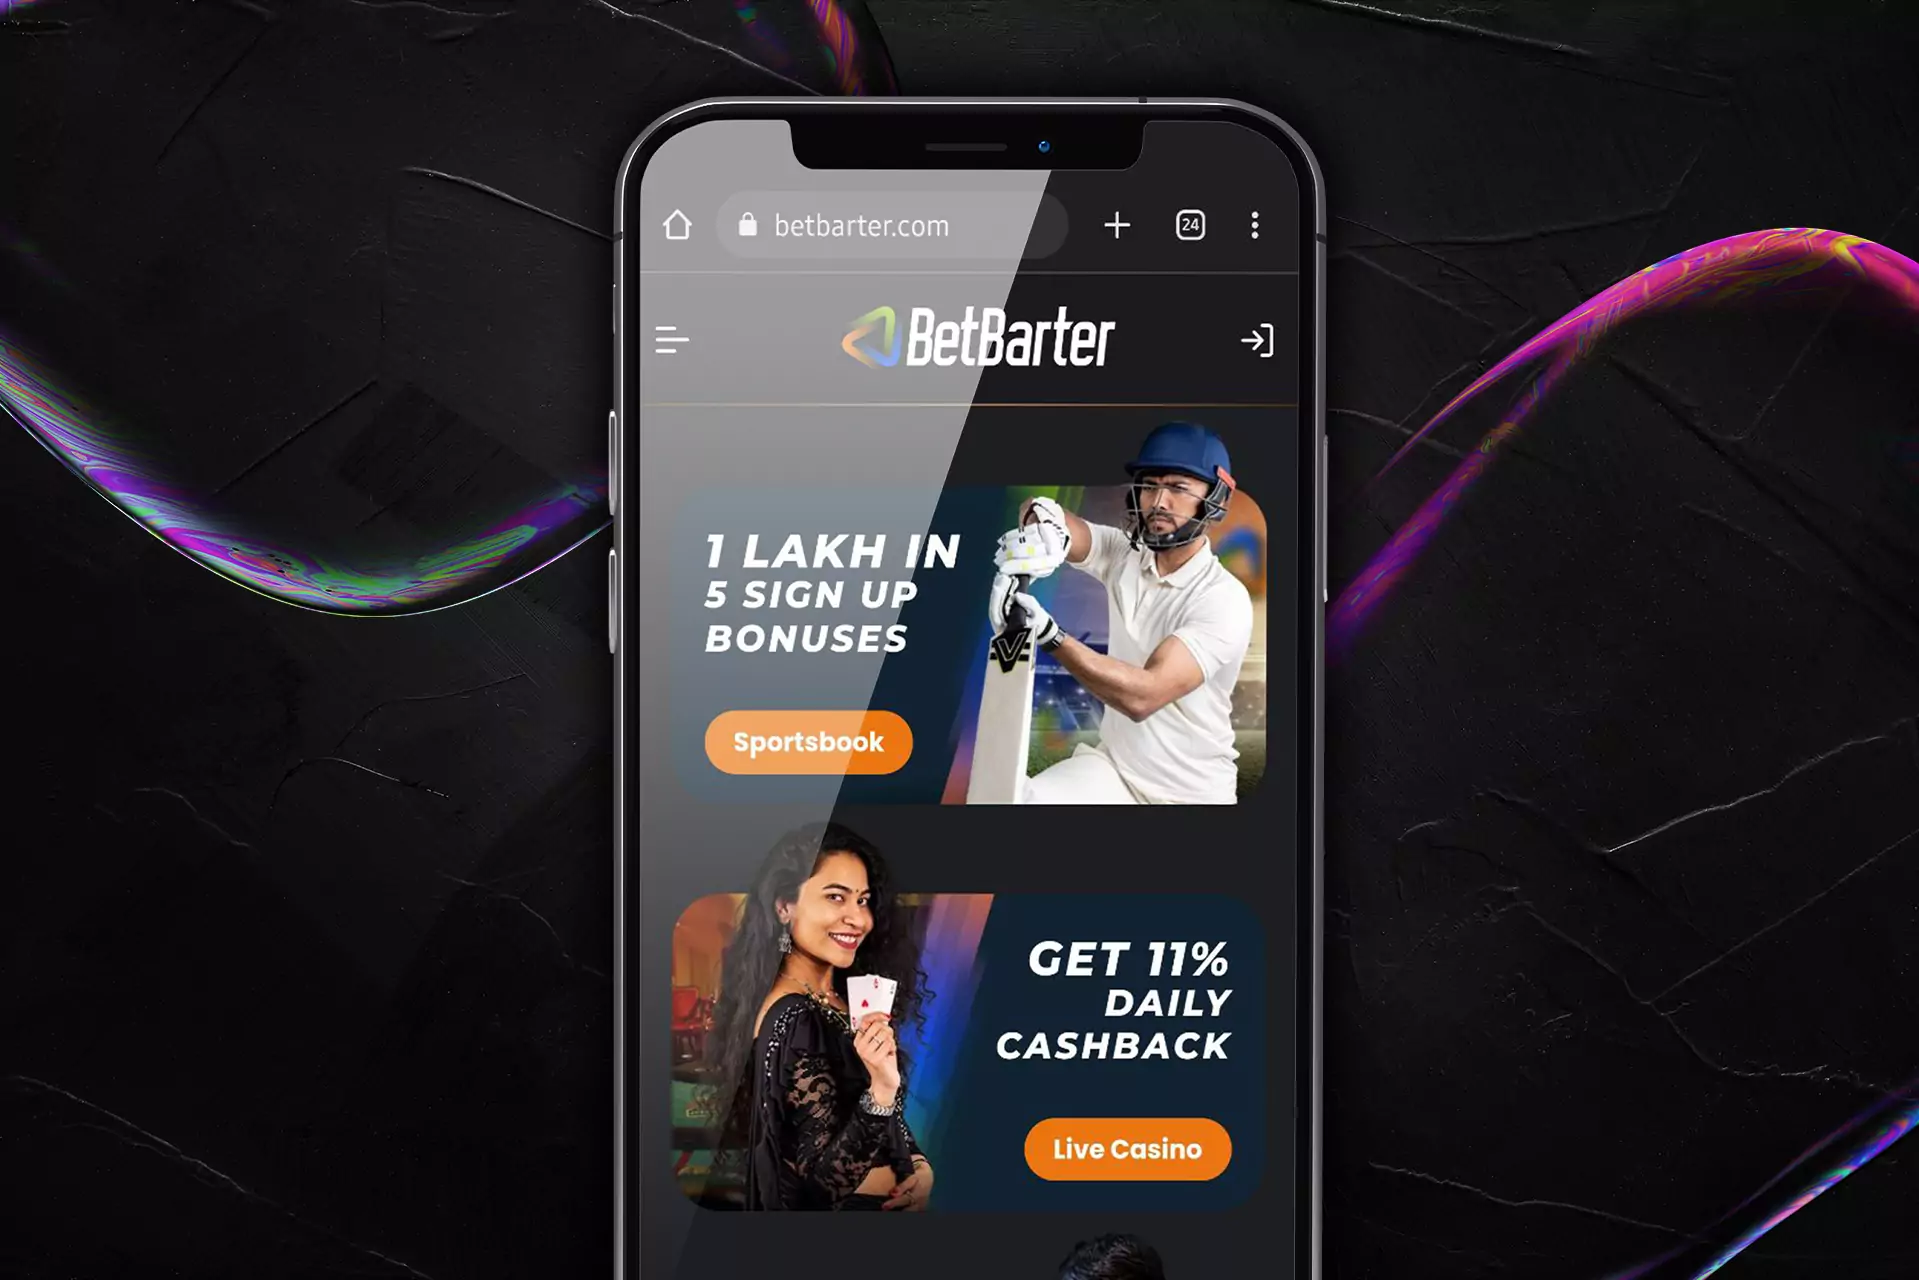 If you don't want to install the Betbarter app, you can use the mobile website version.